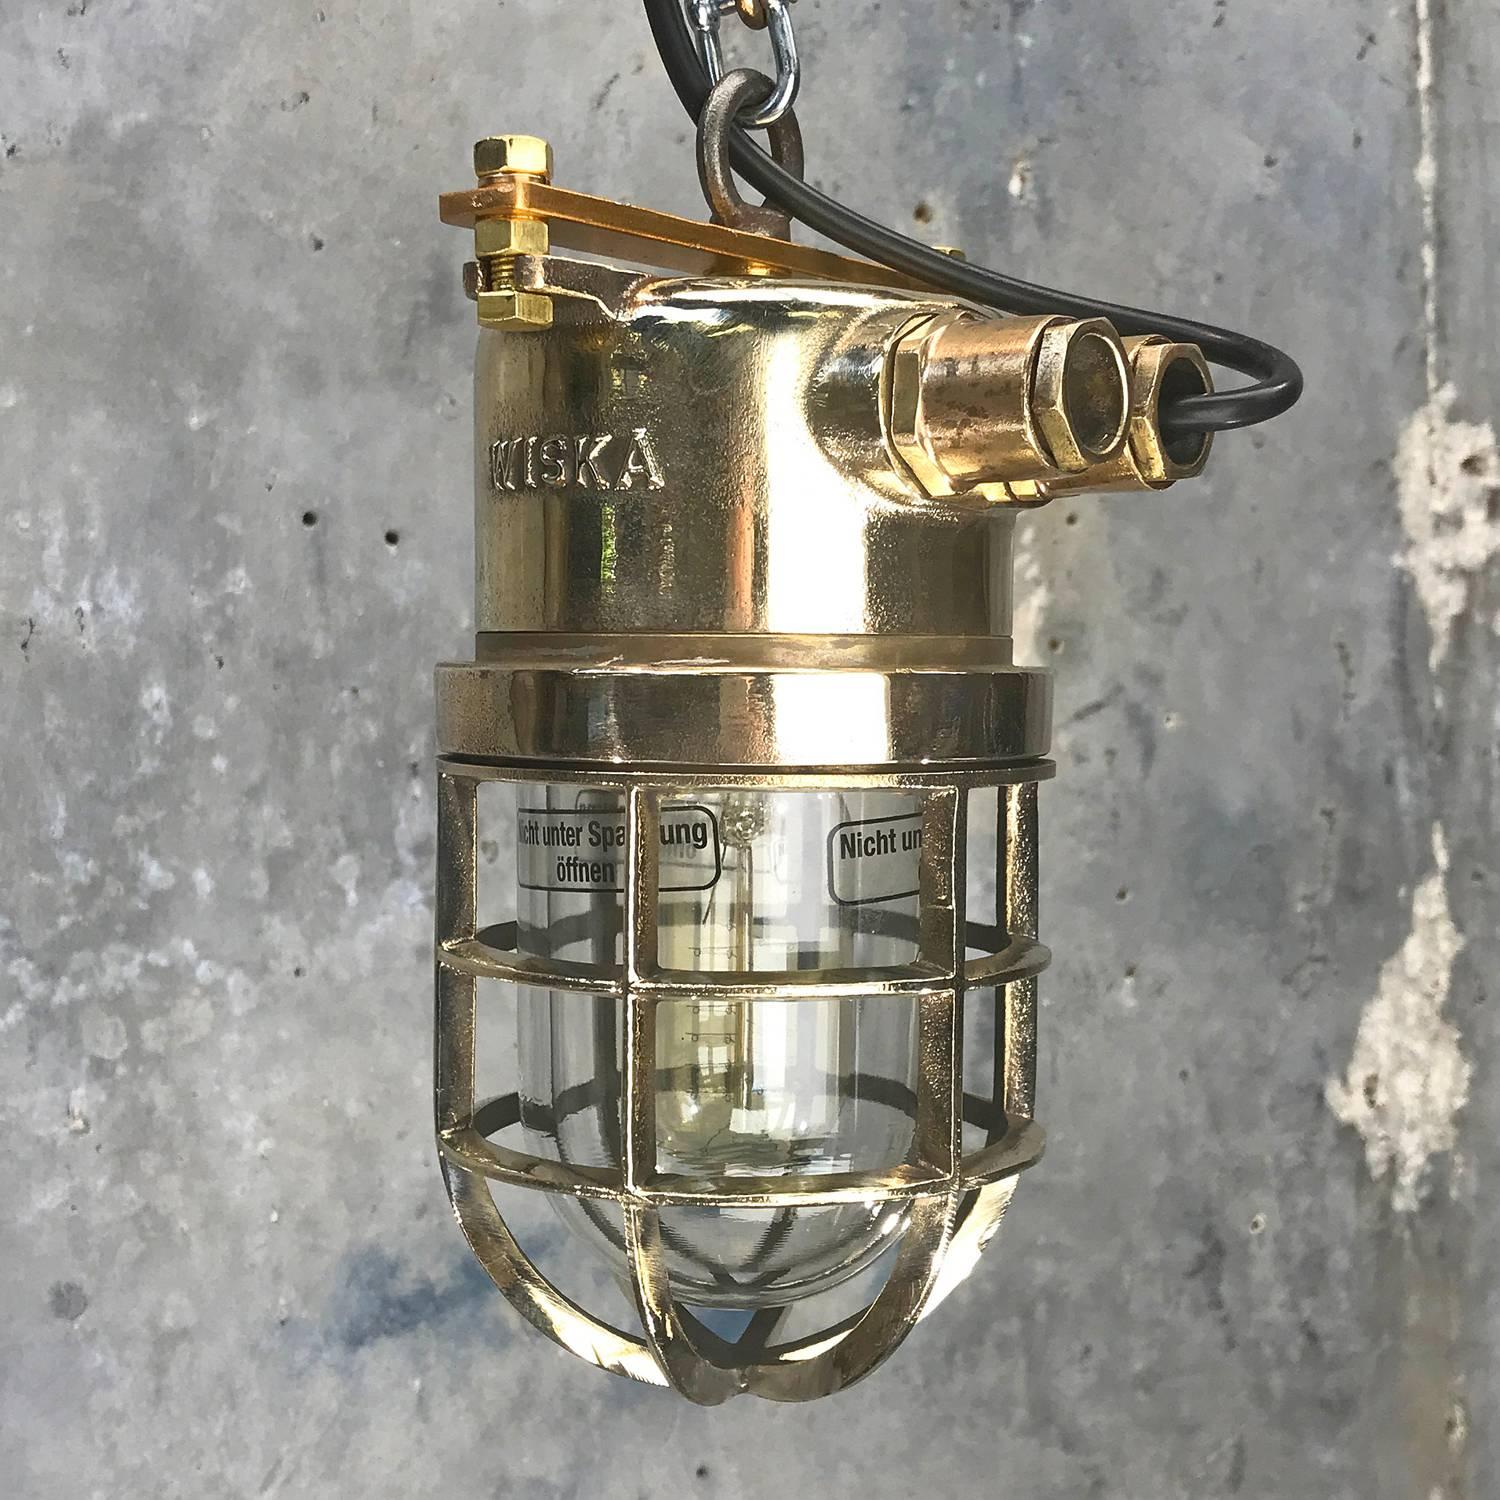 Solid cast brass explosion proof pendant manufactured circa 1980. Ex. rated and reclaimed from supertankers.
 
It has the original ceramic and brass E27 lamp holder which looks brand new, and is completely free from chips / damage. 
 
Reclaimed